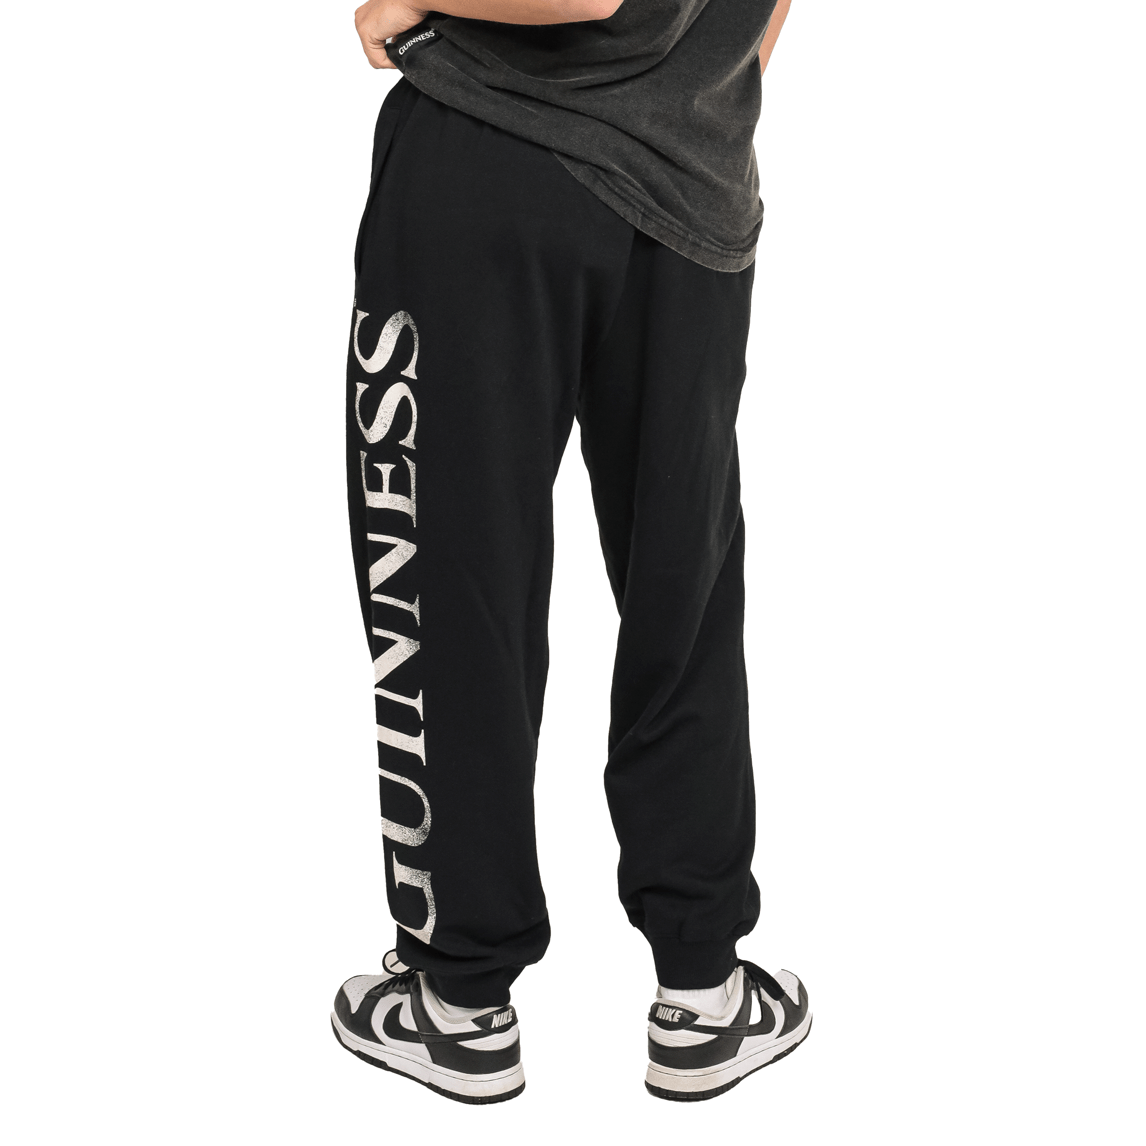 A woman wearing Guinness UK organic cotton black joggers with the word Guinness on them.